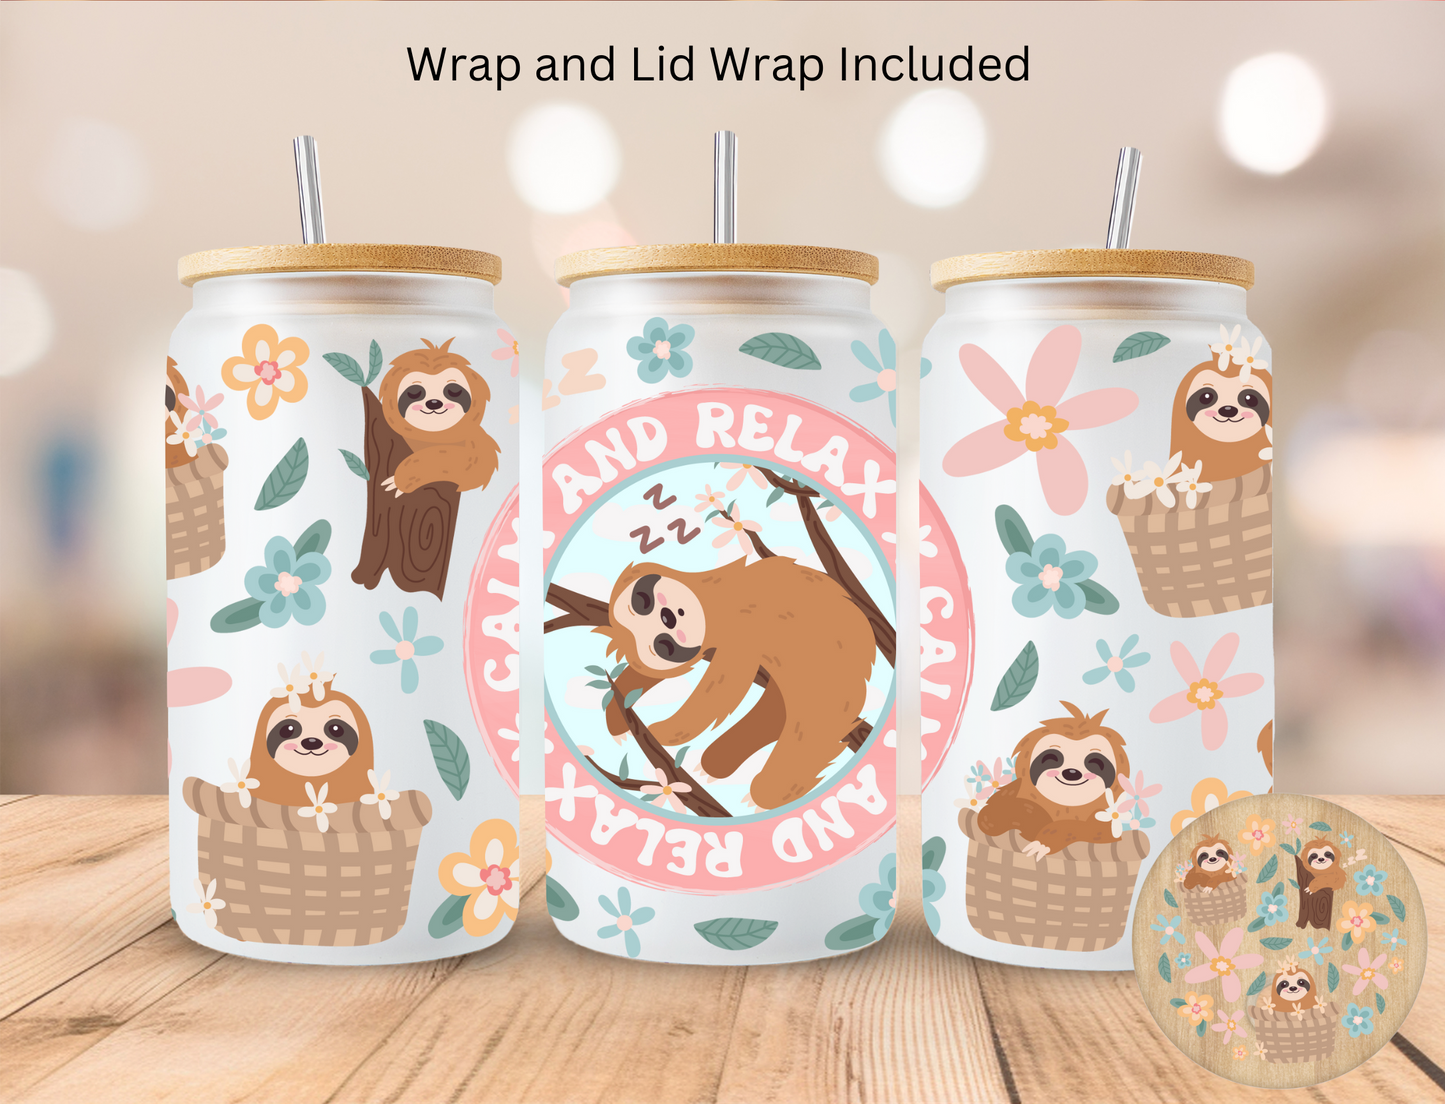 Sloth Calm And Relax - 16 oz / 20 oz Libby UV DTF Wrap and Lid Combo Bundle